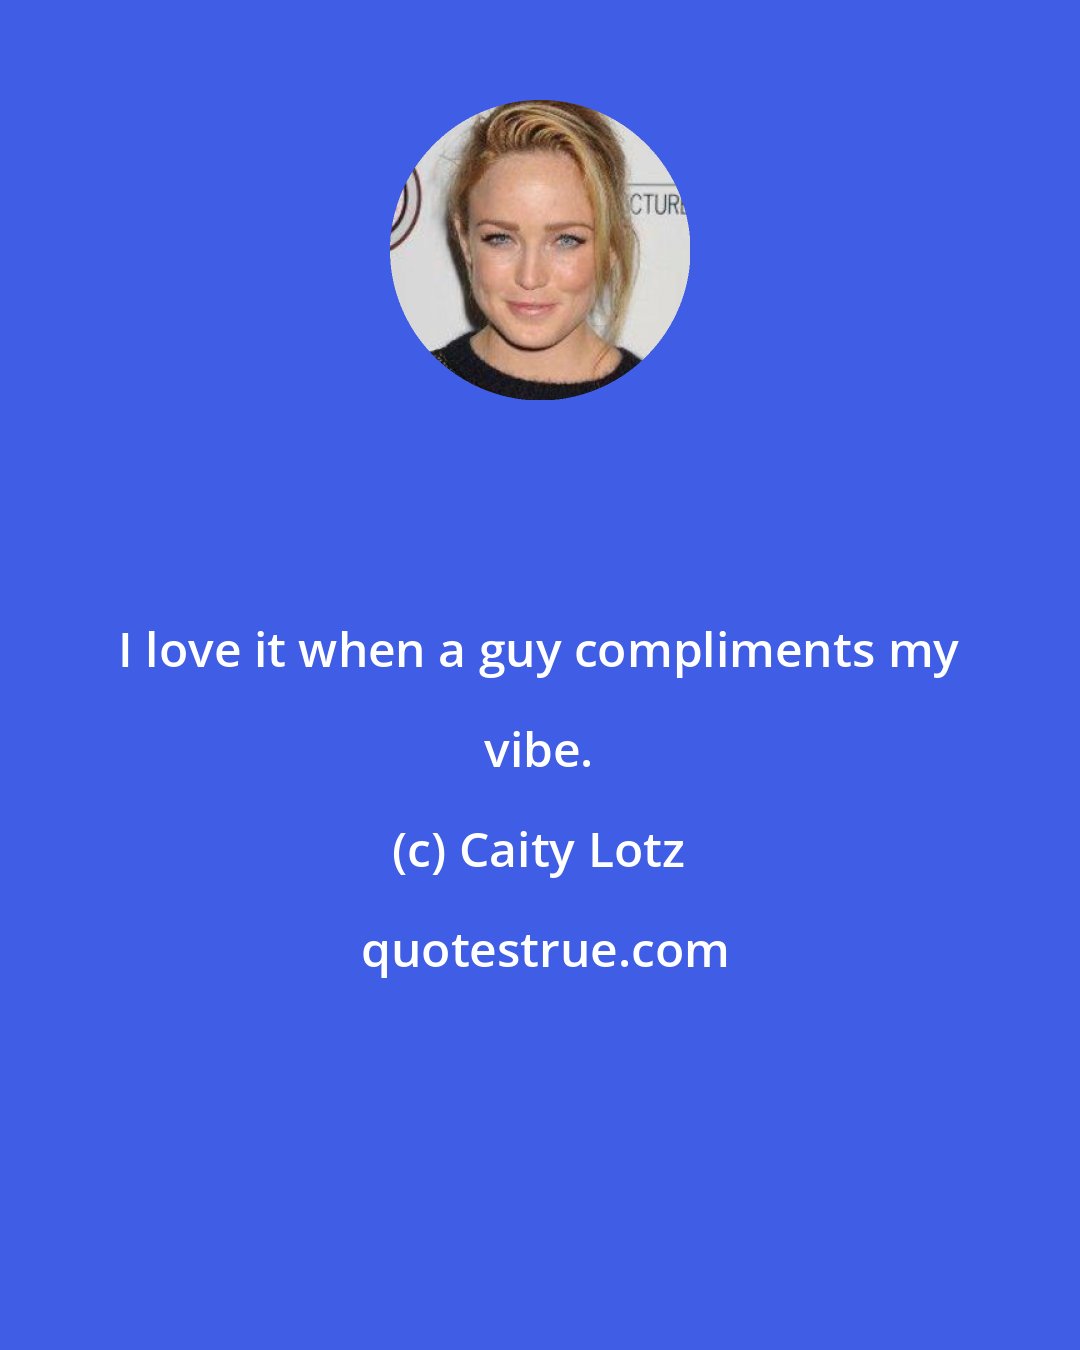 Caity Lotz: I love it when a guy compliments my vibe.